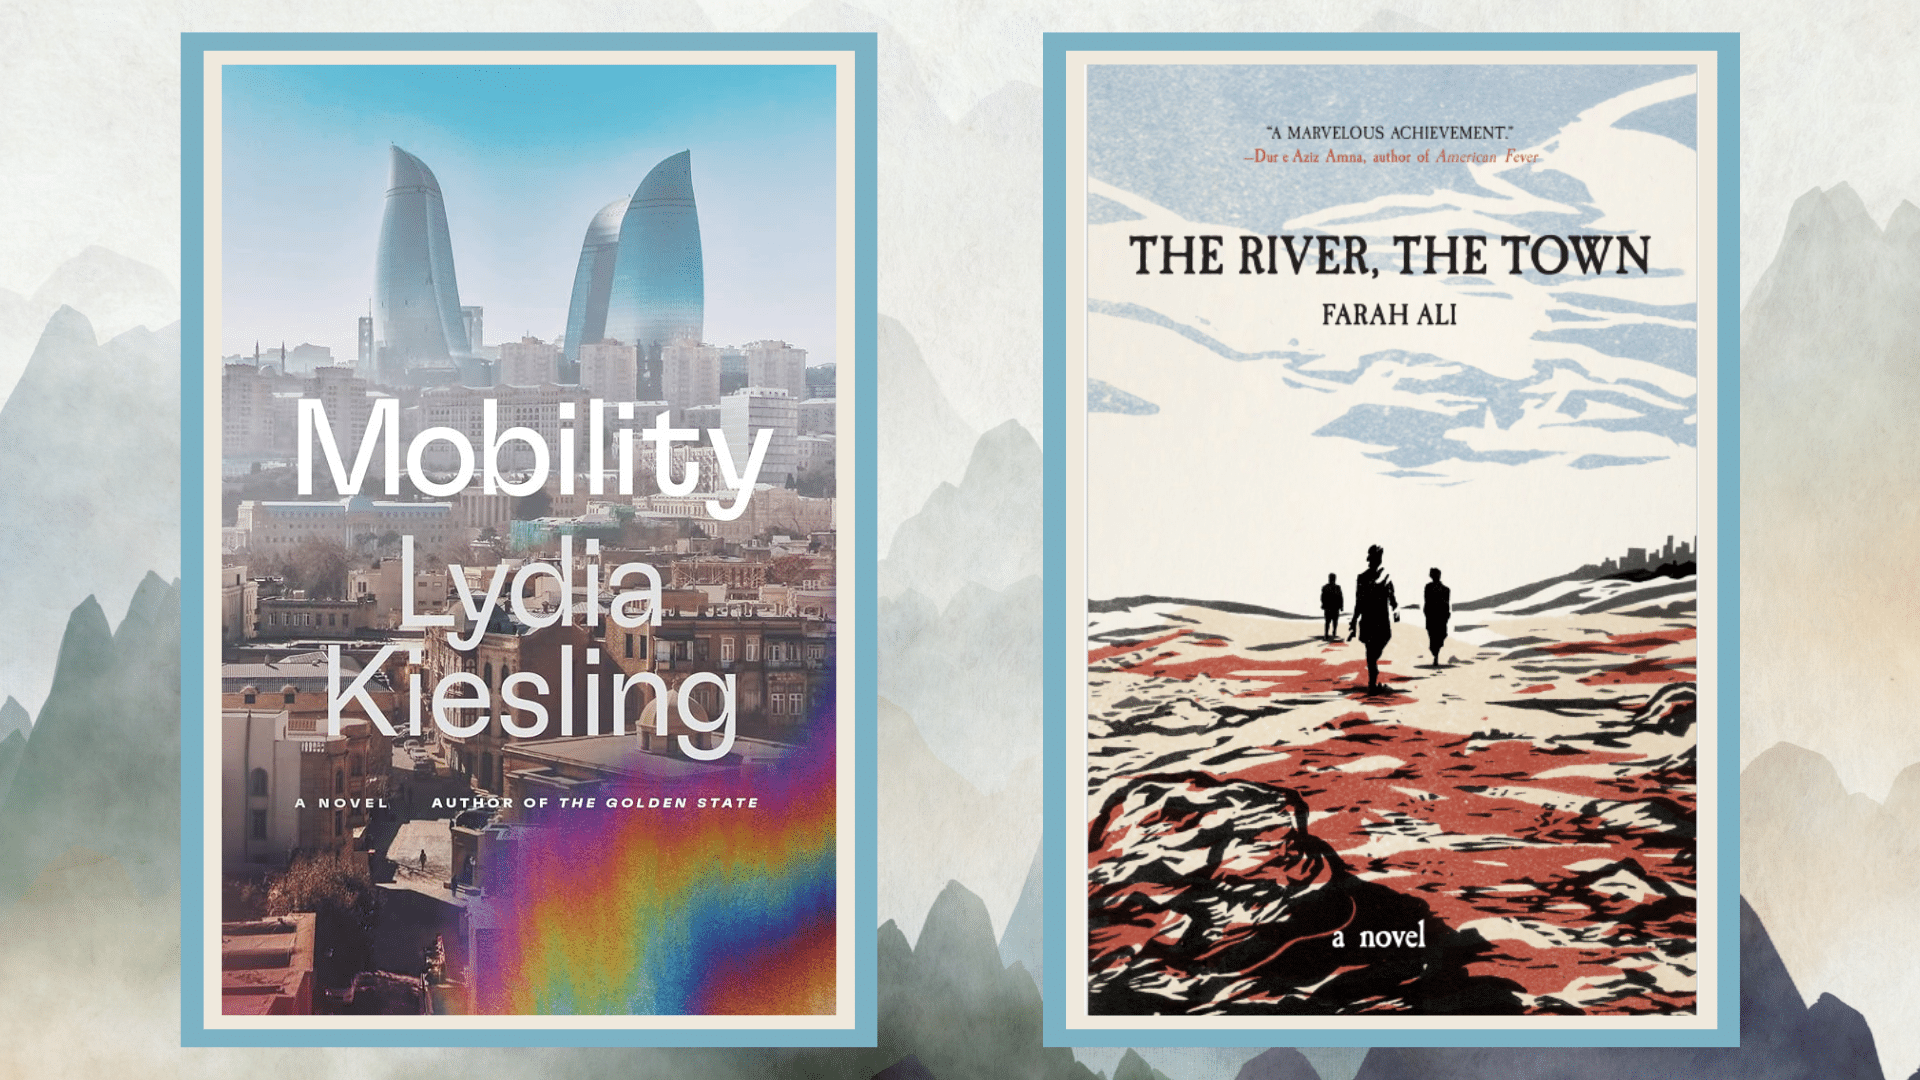 The book covers for Mobility and The River, The Town side by side over a background of misty mountains